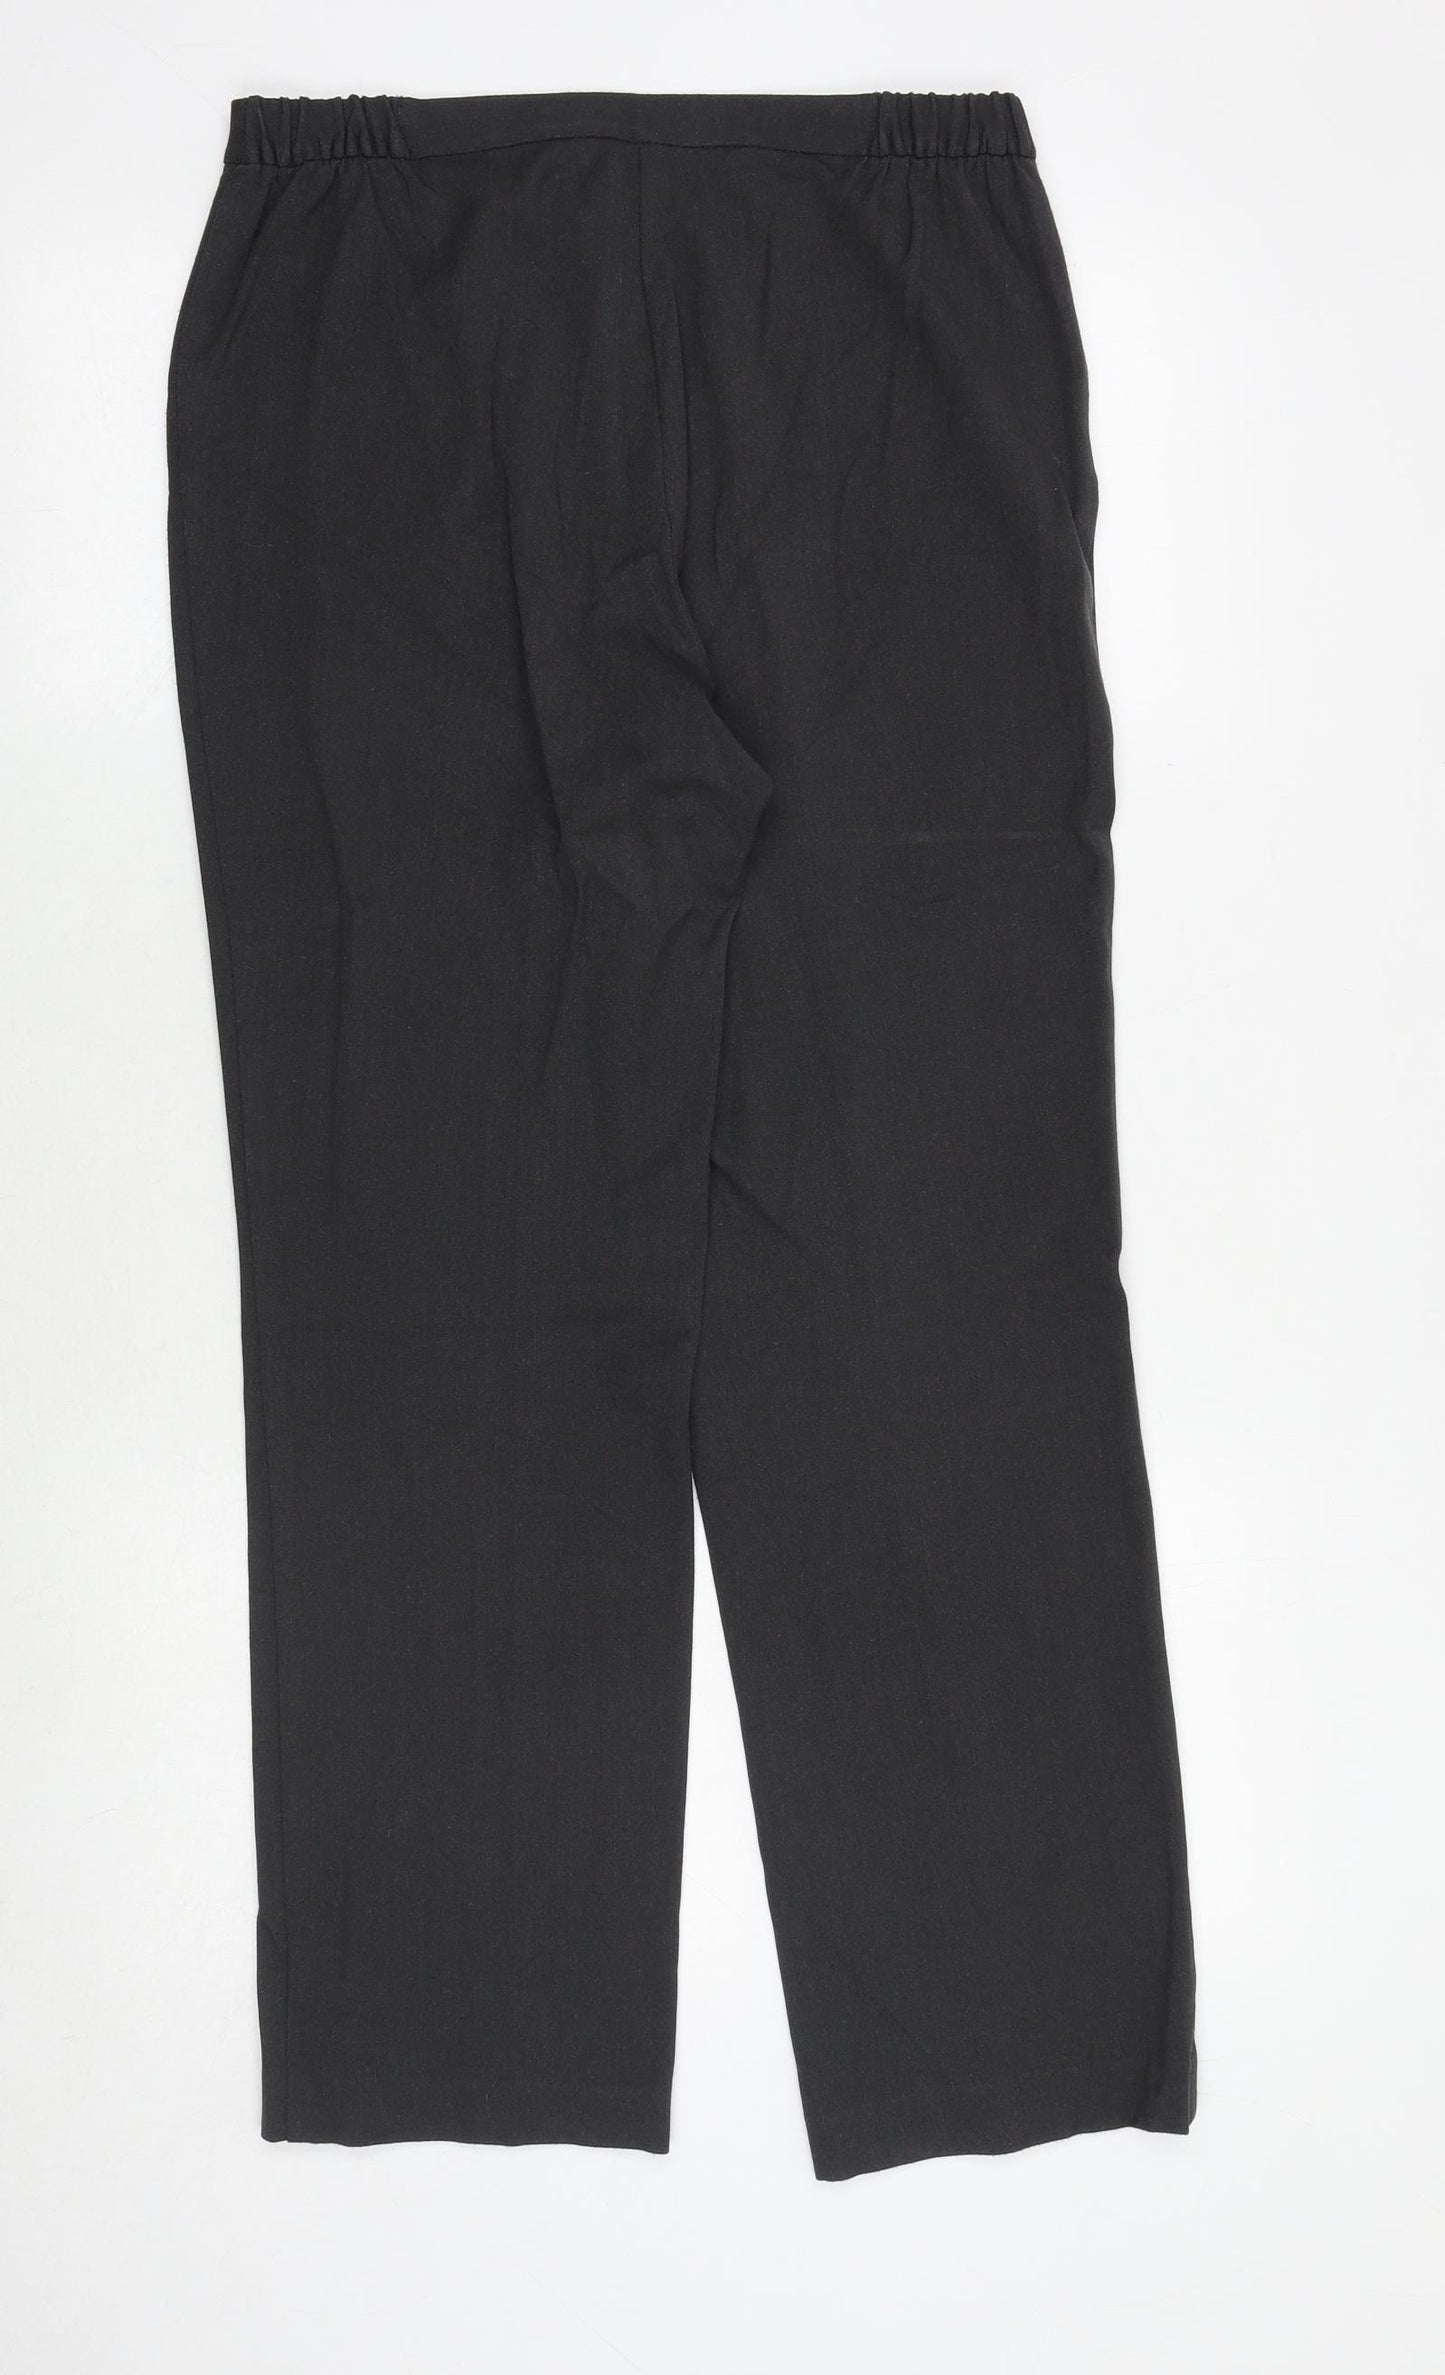 Marks and Spencer Womens Grey Viscose Trousers Size 10 Regular Zip